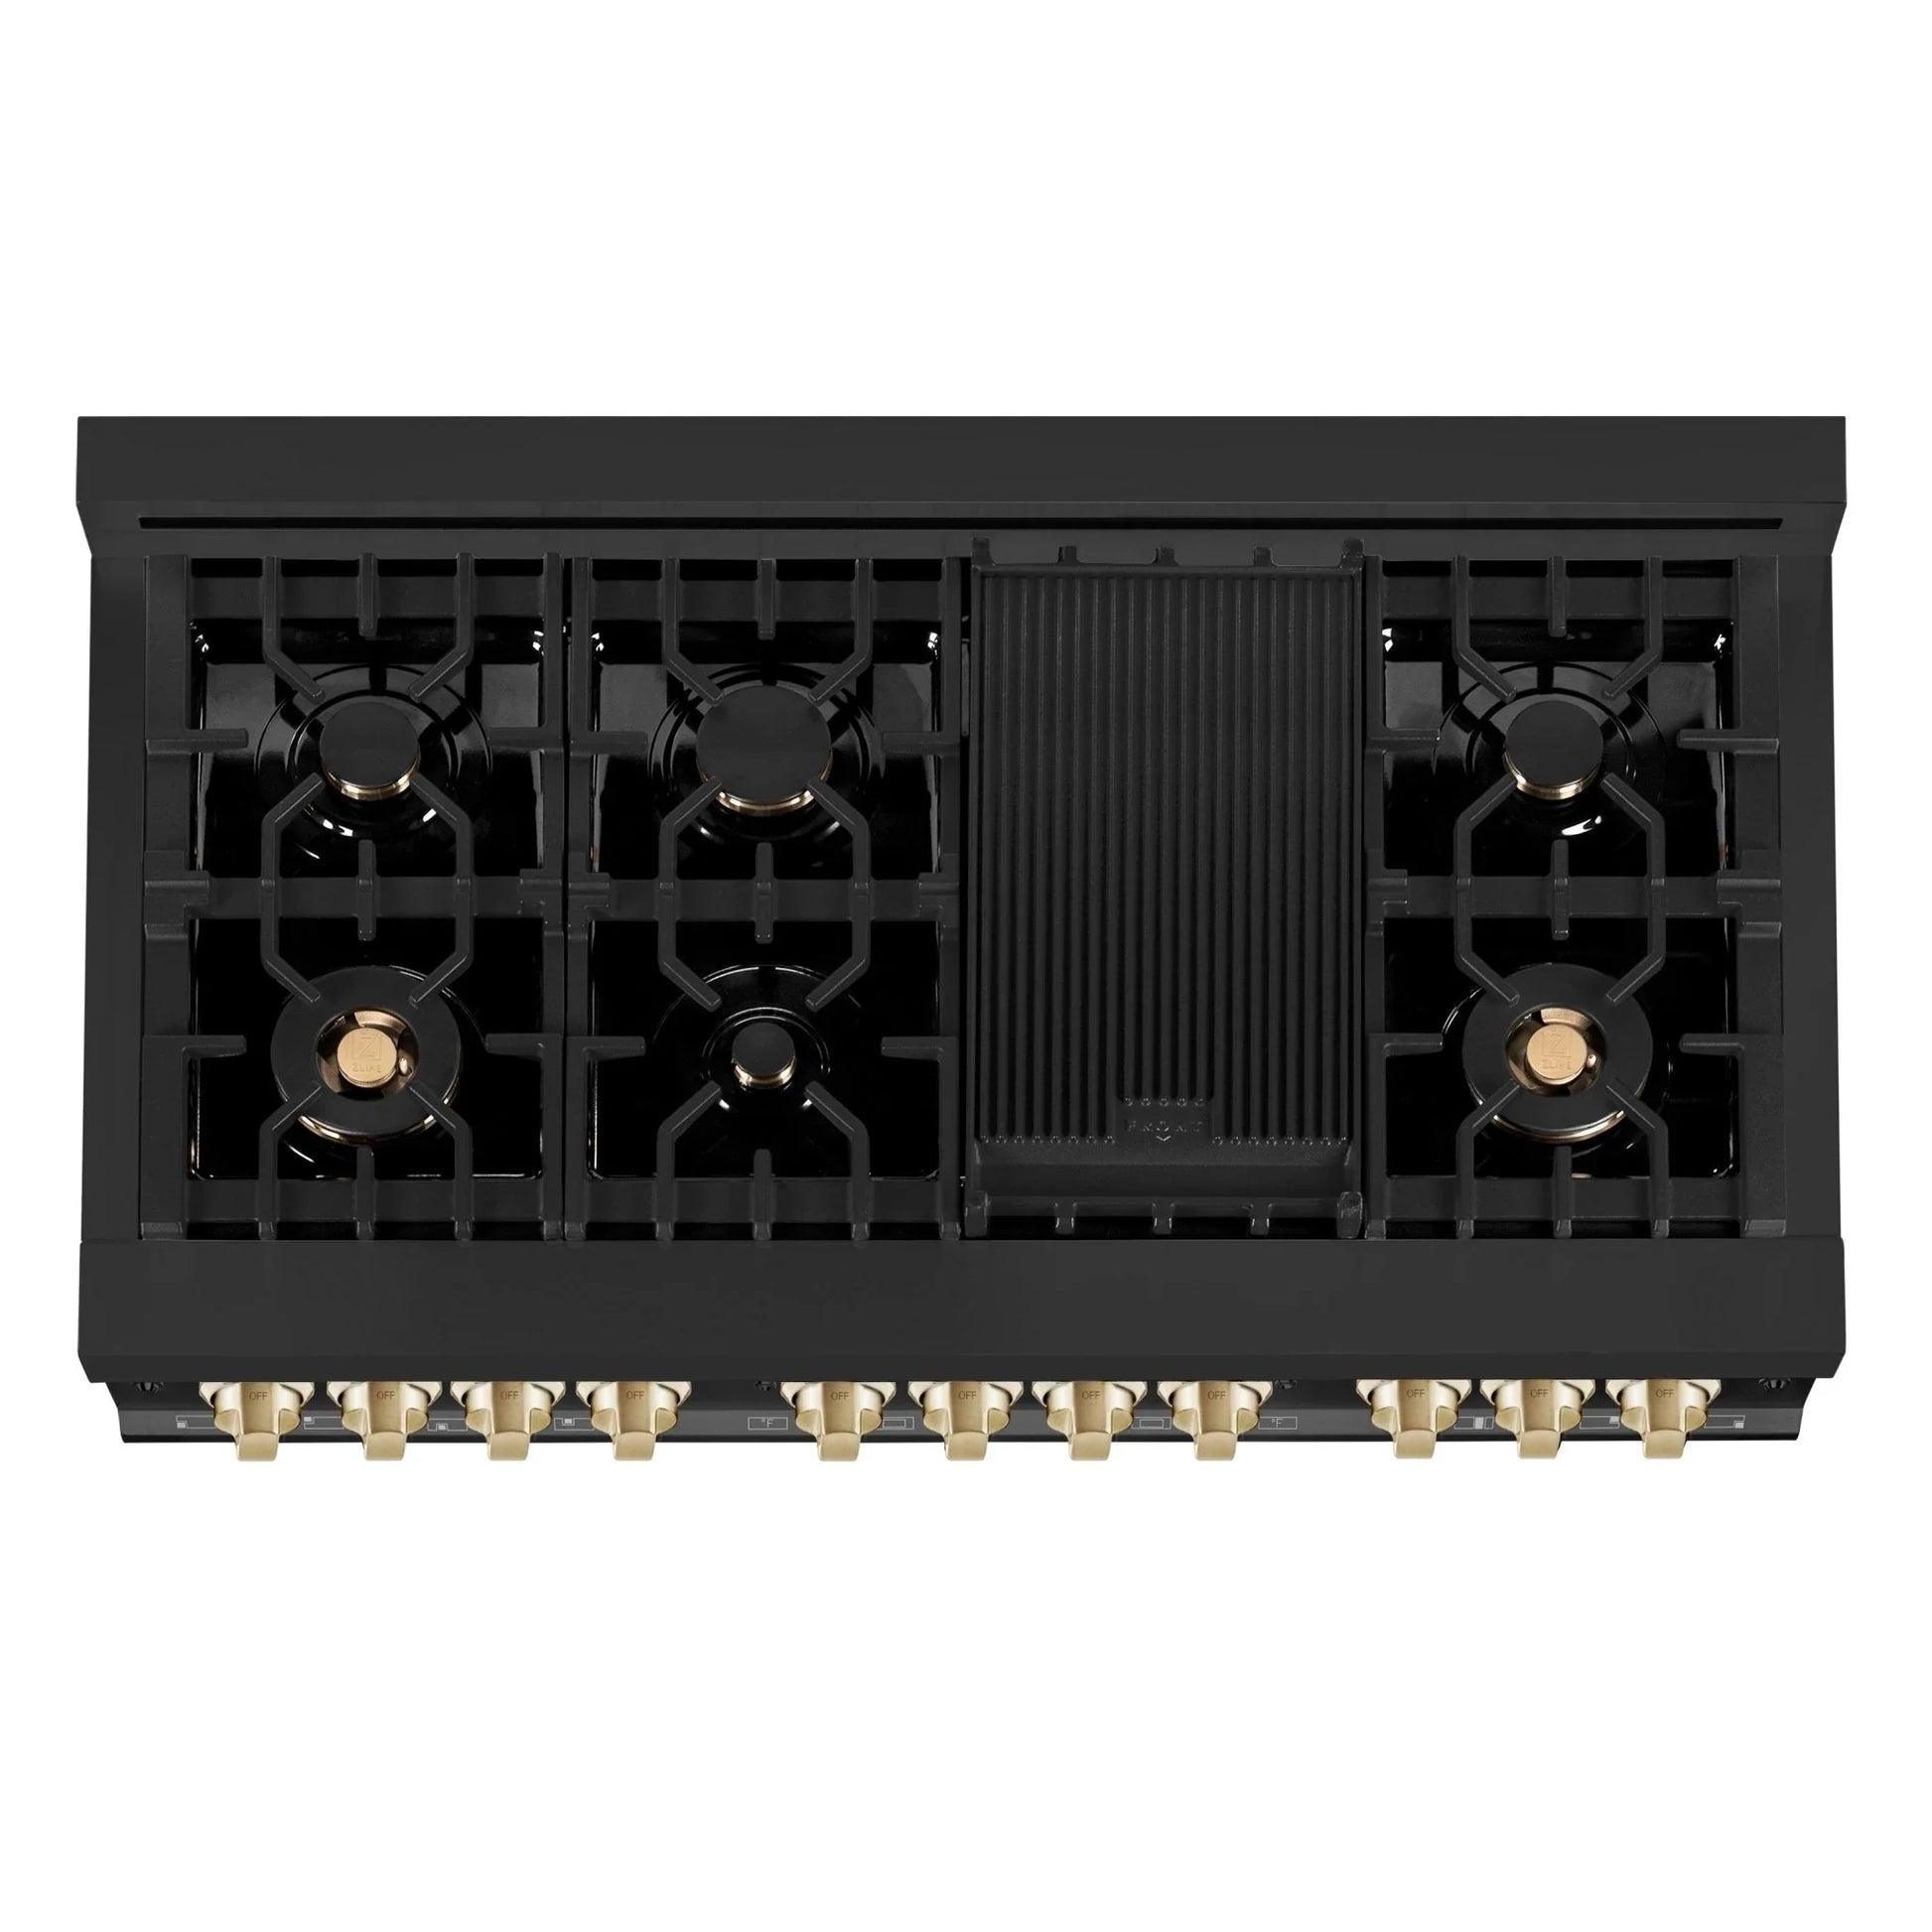 ZLINE Autograph Edition 48" Dual Fuel Range with Gas Stove and Electric Oven - Black Stainless Steel with Gold Accents